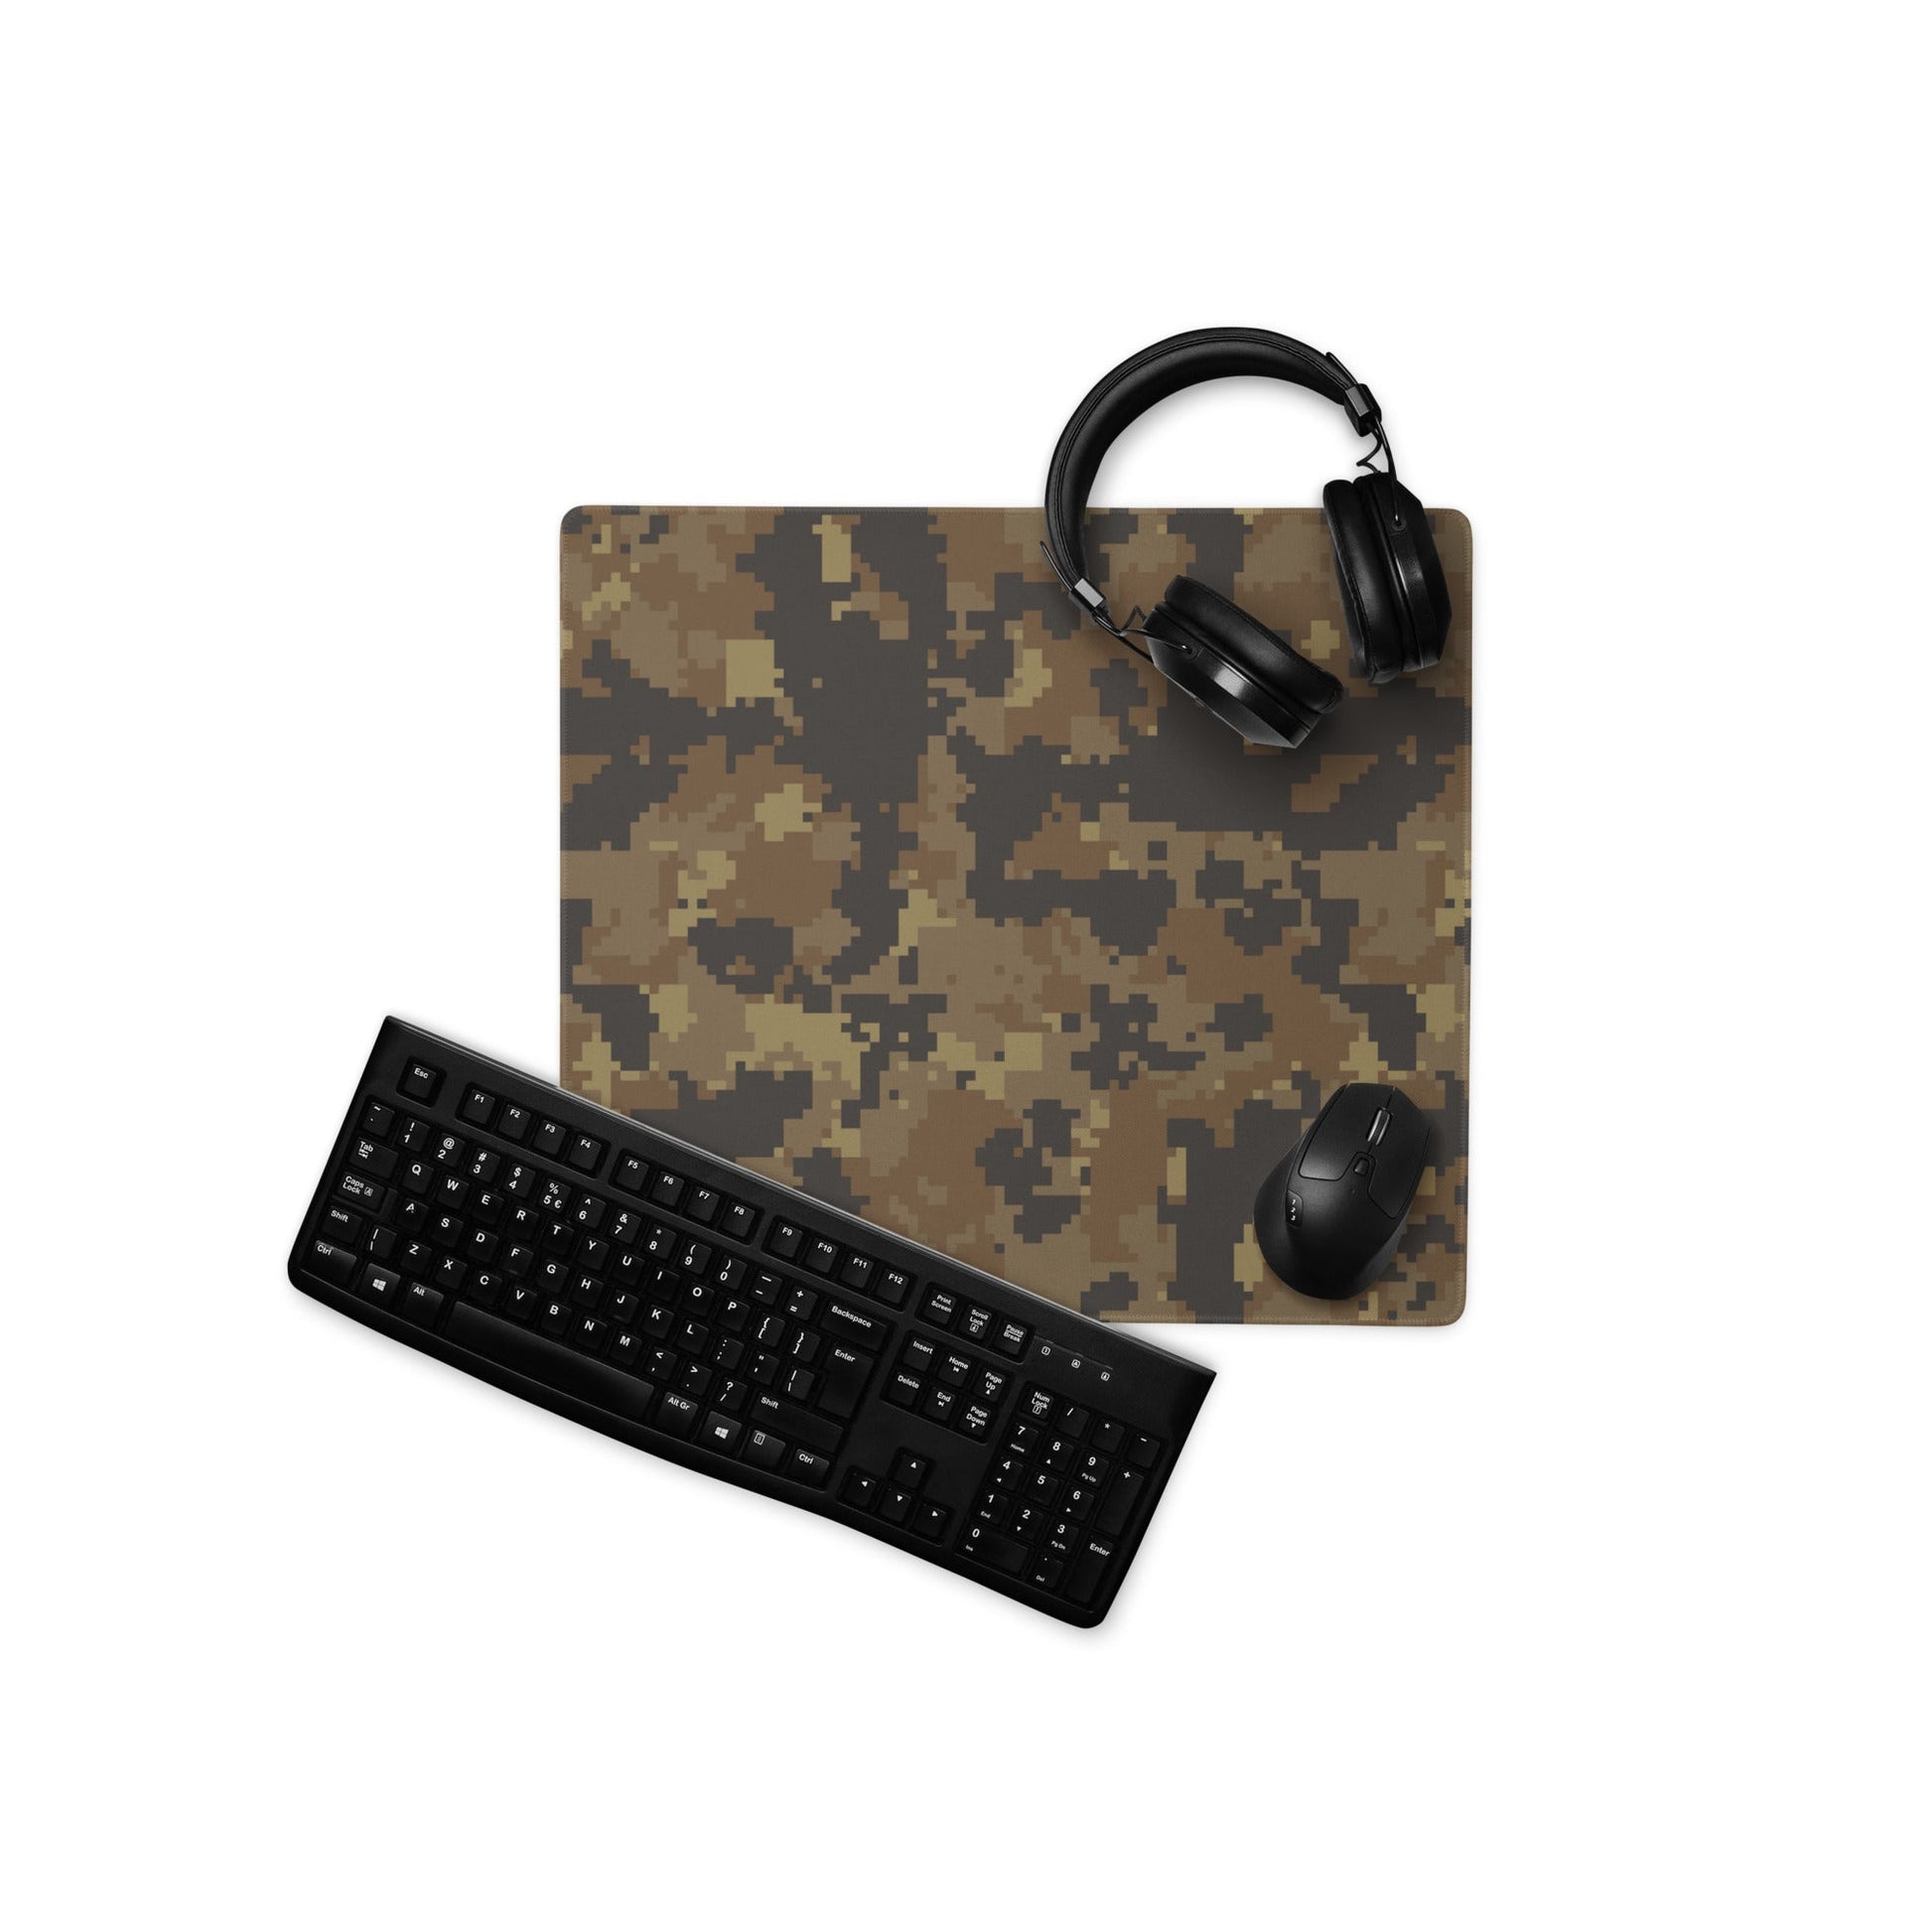 Mexican Naval Infantry Digital Desert CAMO Gaming mouse pad - 18″×16″